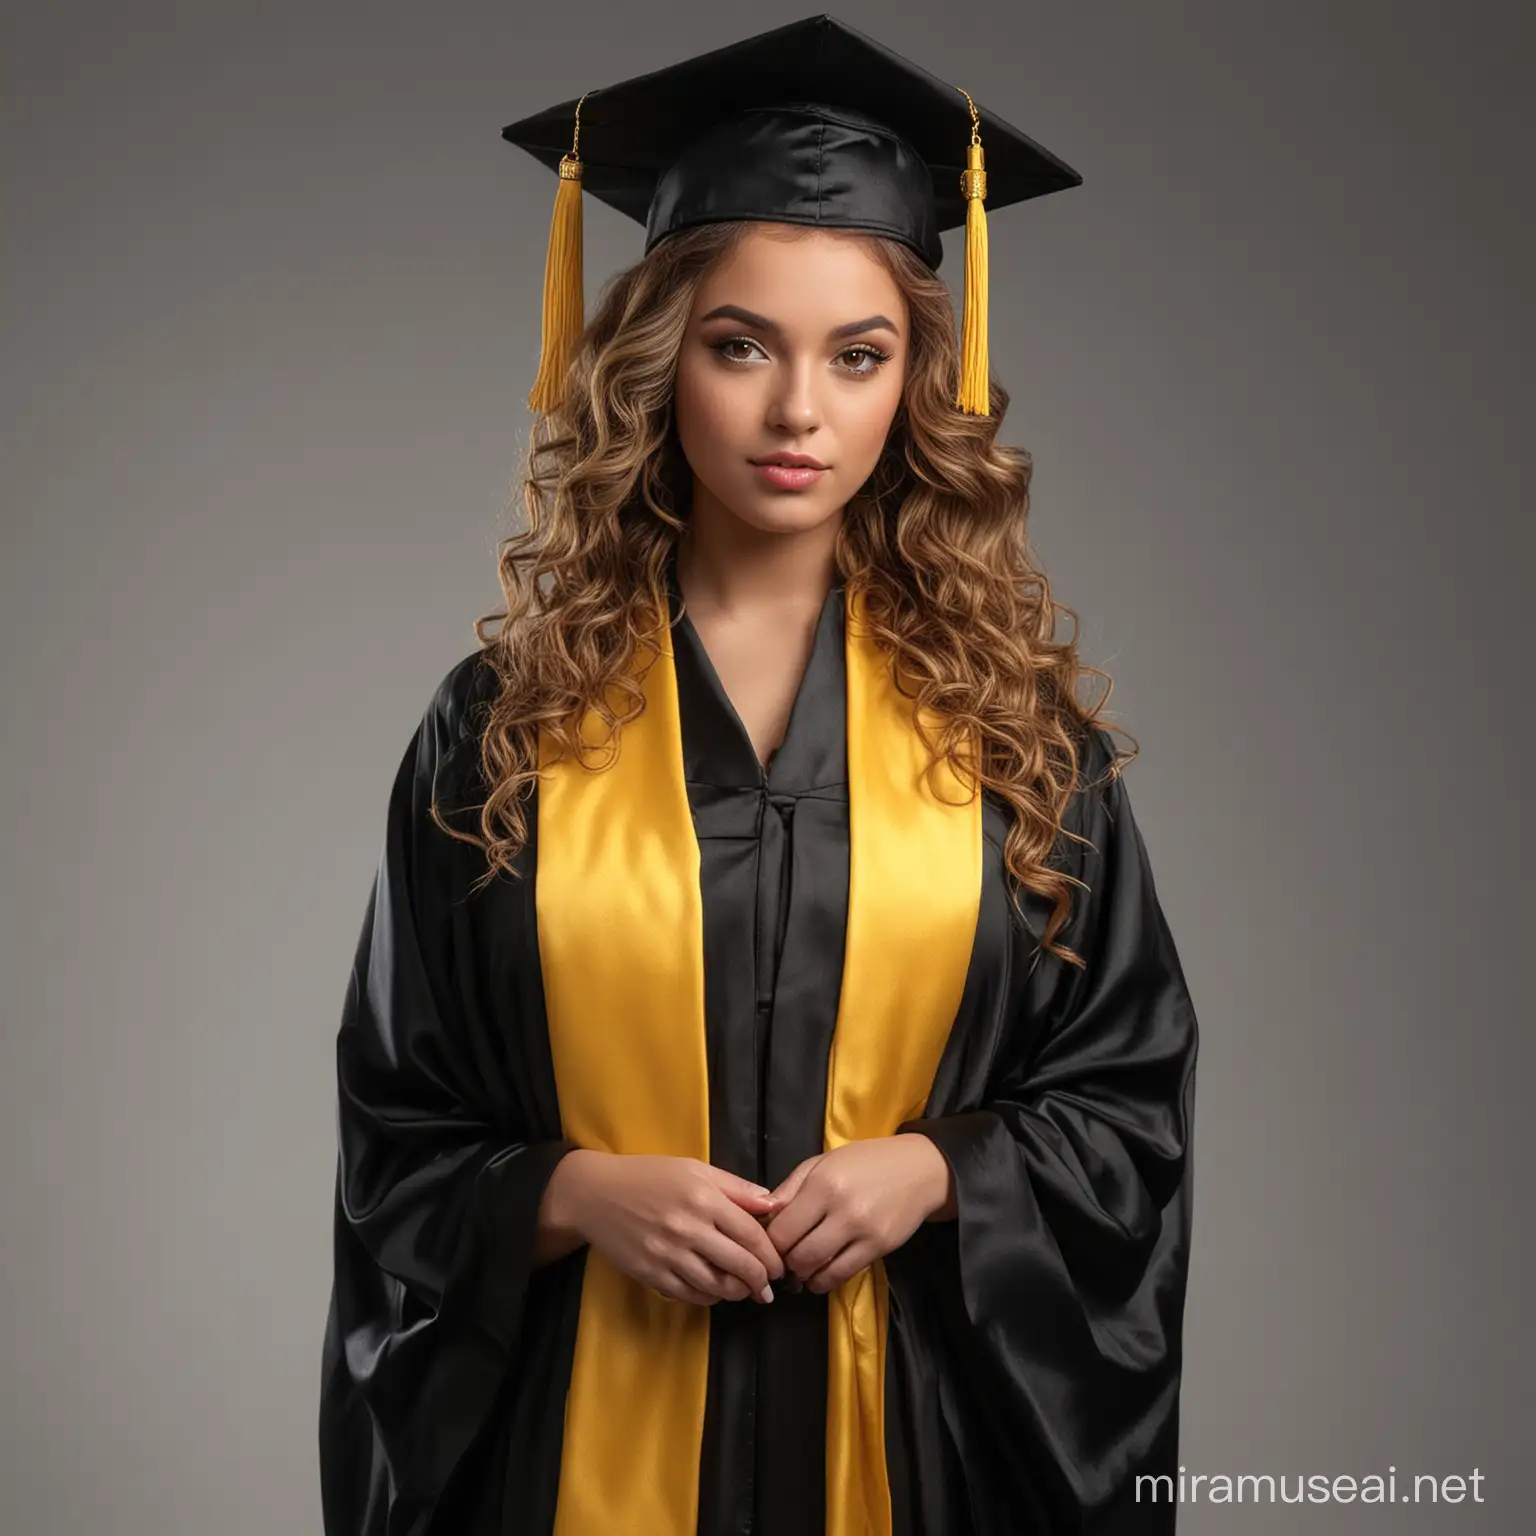 High School Student in Cap and Gown with Glam Makeup